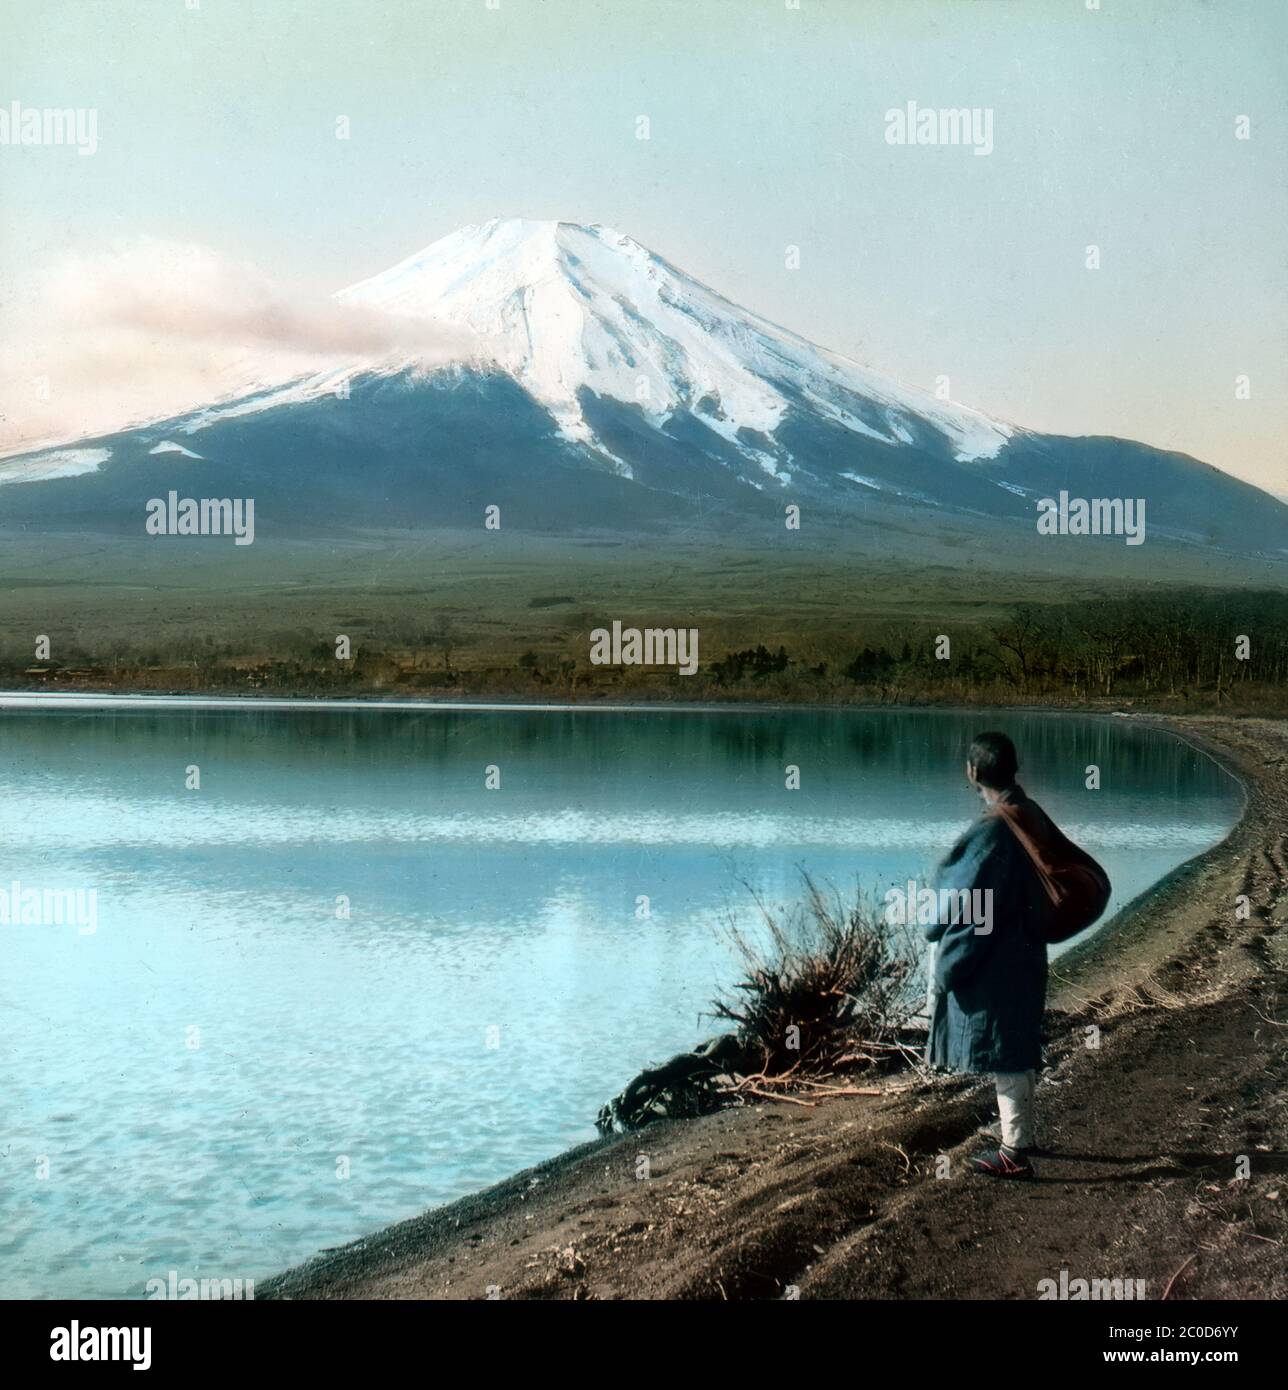 [ 1900s Japan - Mount Fuji ] — A view of a snowcapped Mount Fuji as seen from Lake Yamanaka in Yamanashi Prefecture.  20th century vintage glass slide. Stock Photo